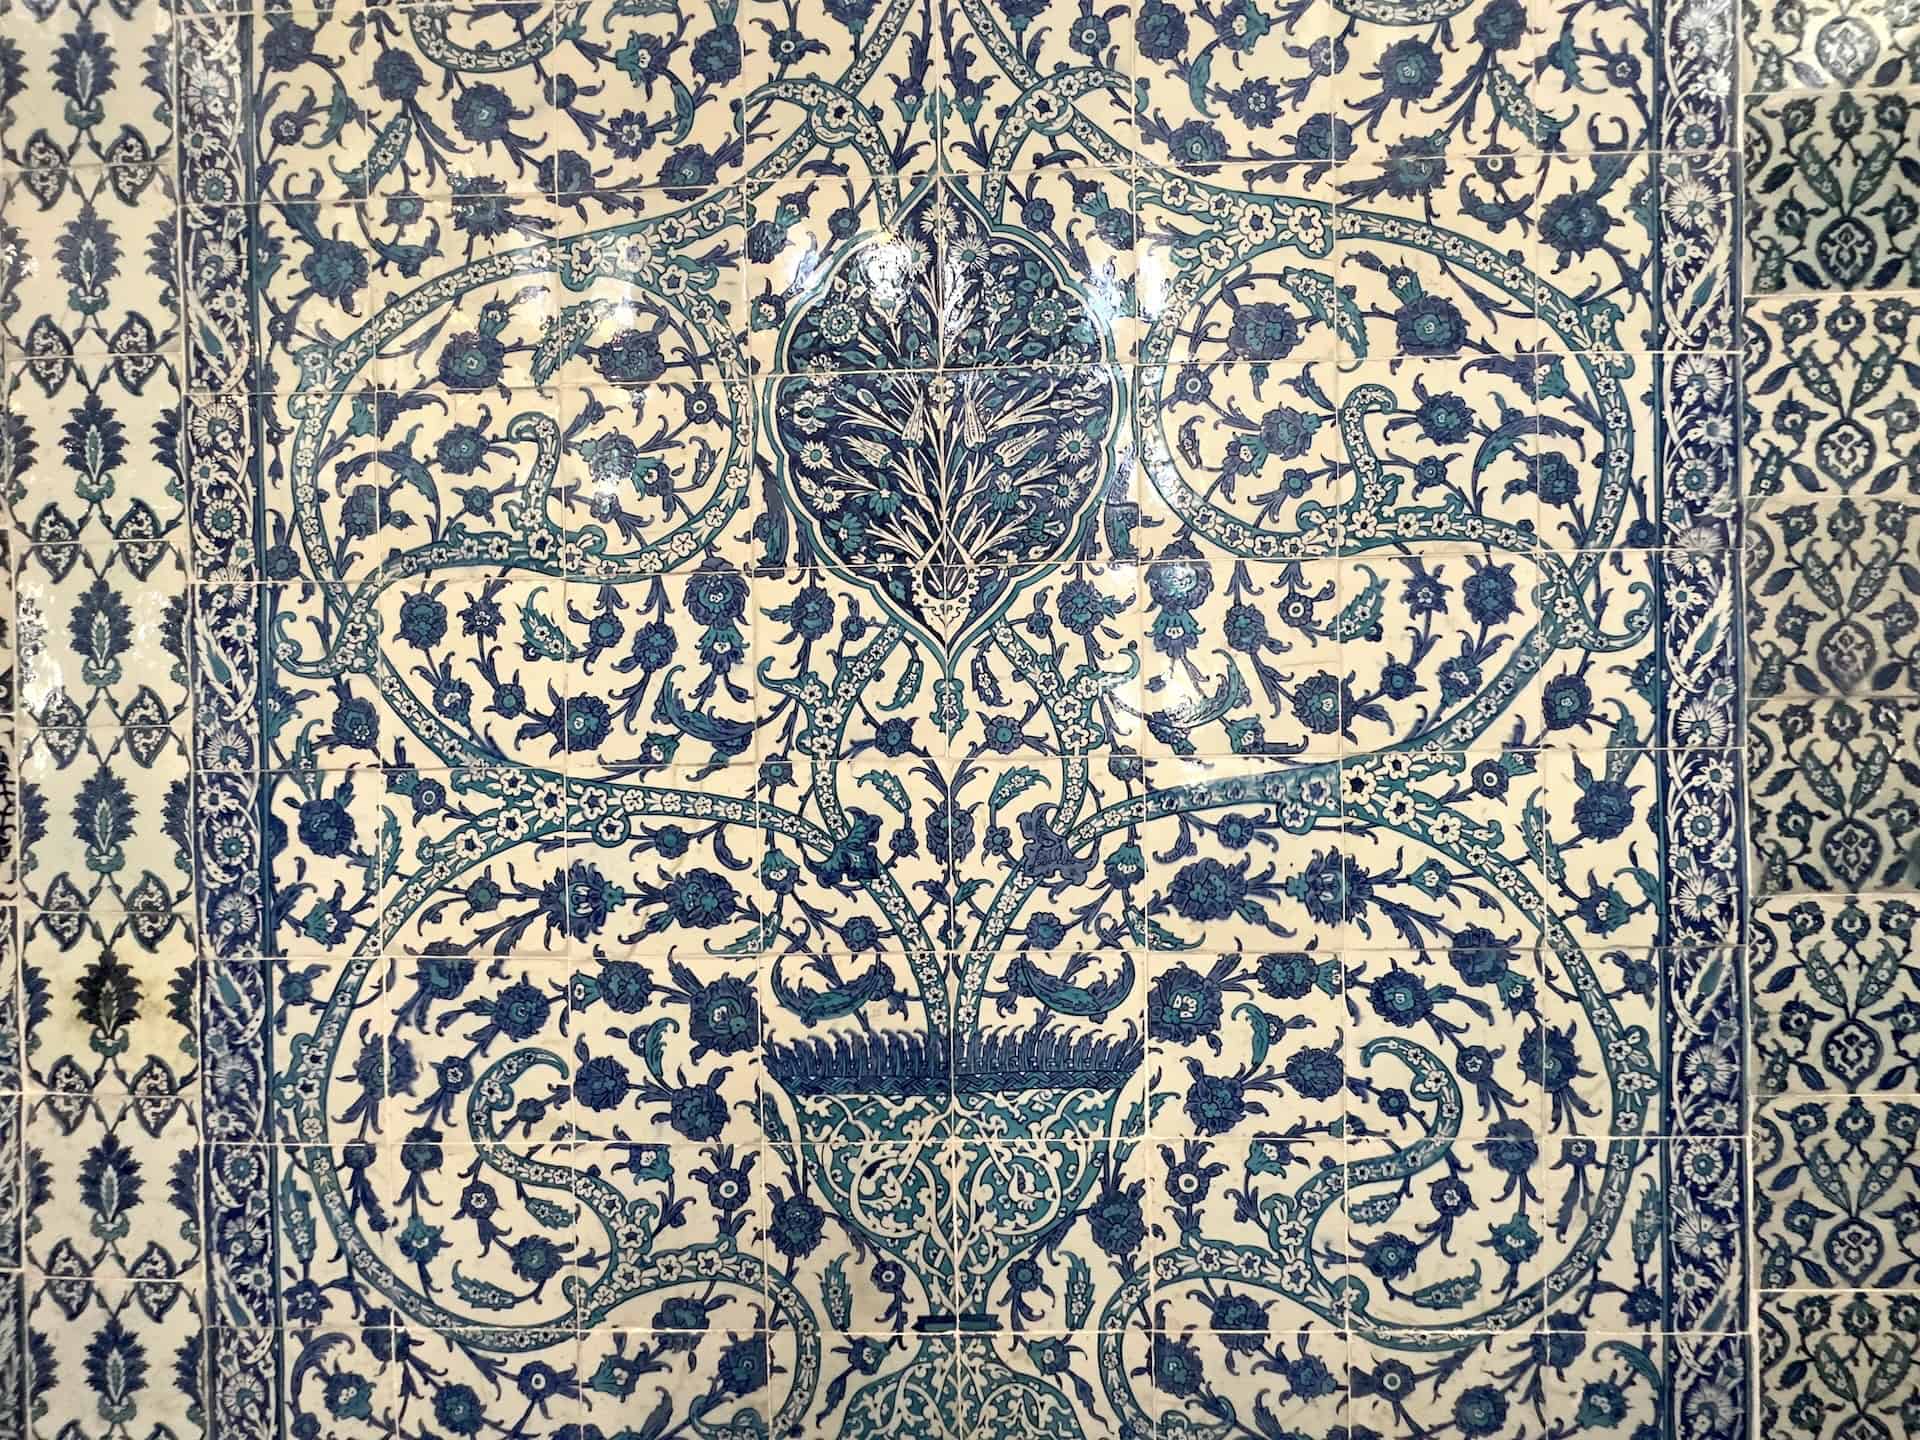 Iznik tiles at the Tomb of Turhan Hatice Sultan